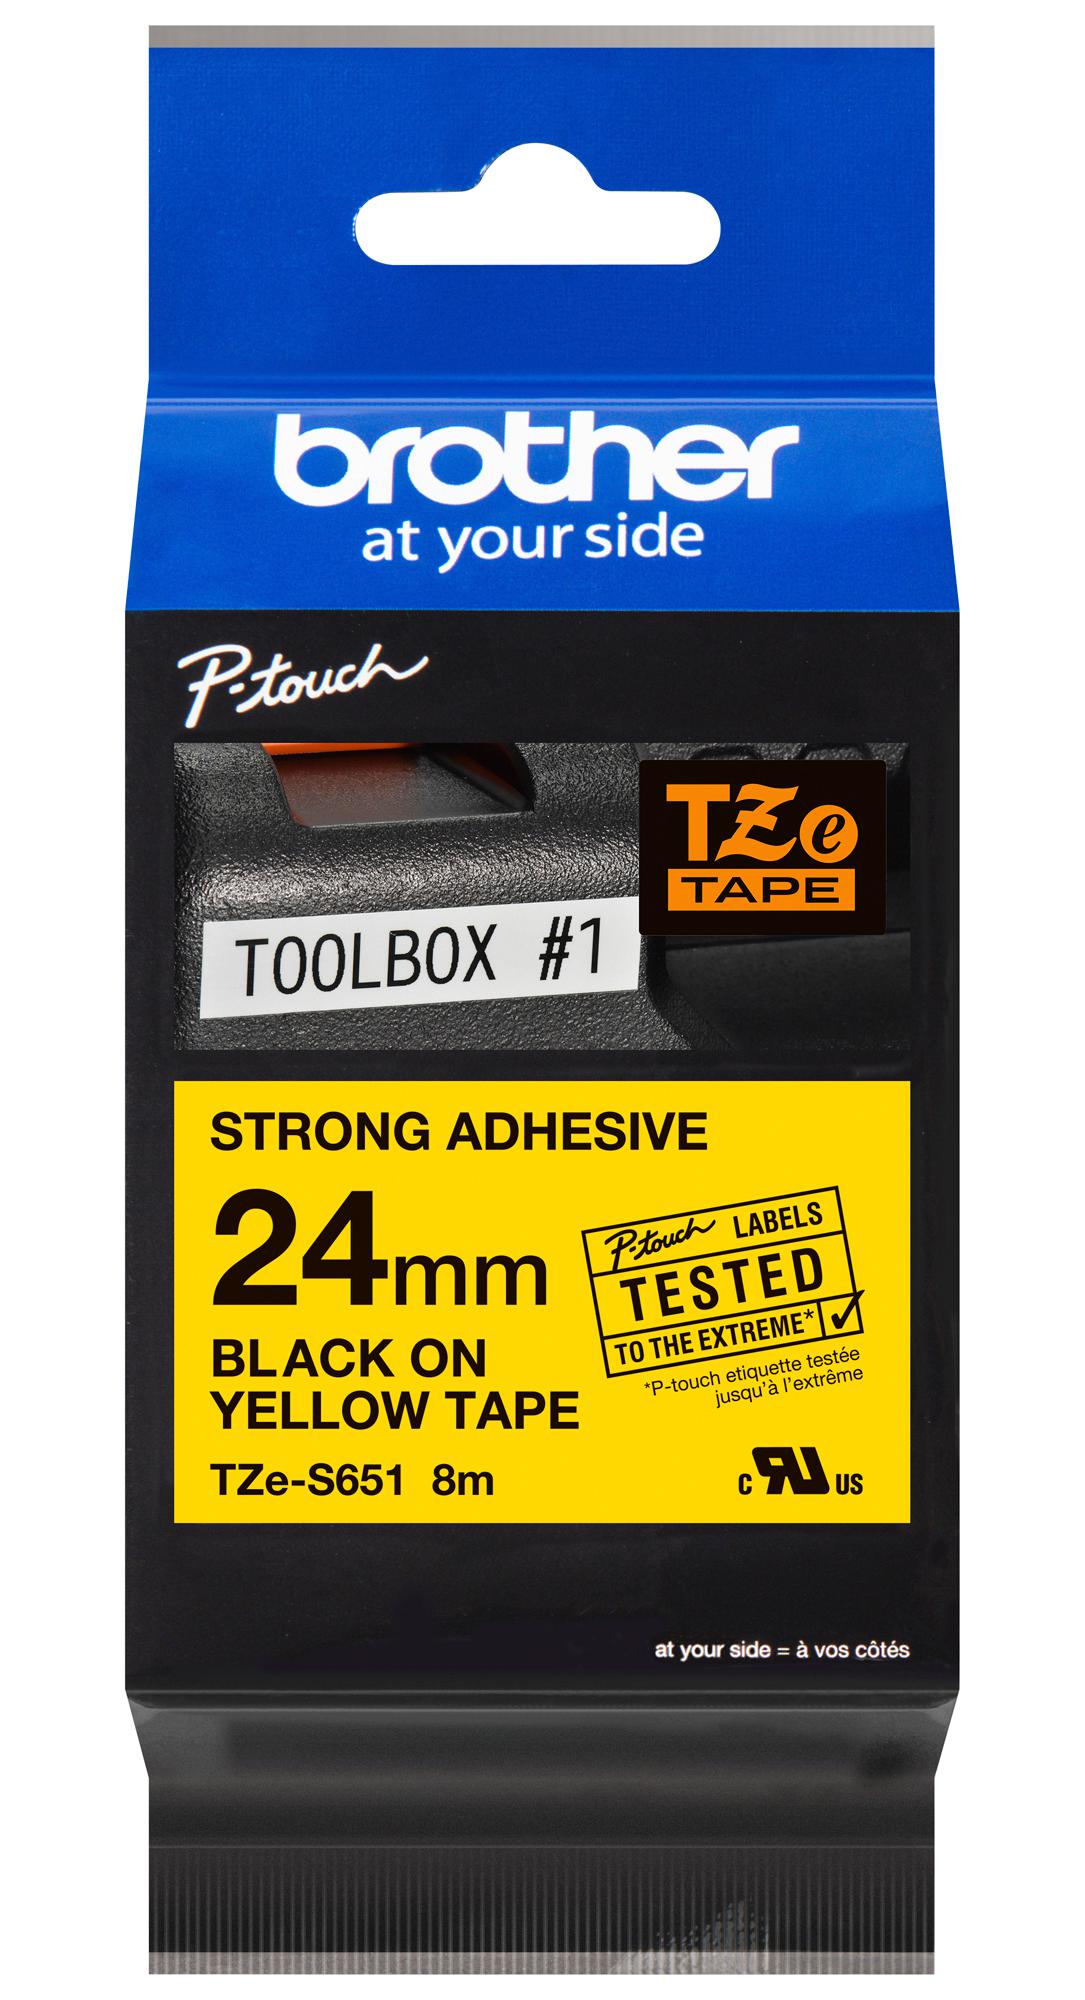 Brother Tze-S651 Tape, 24mm, Black/yellow, S/adh